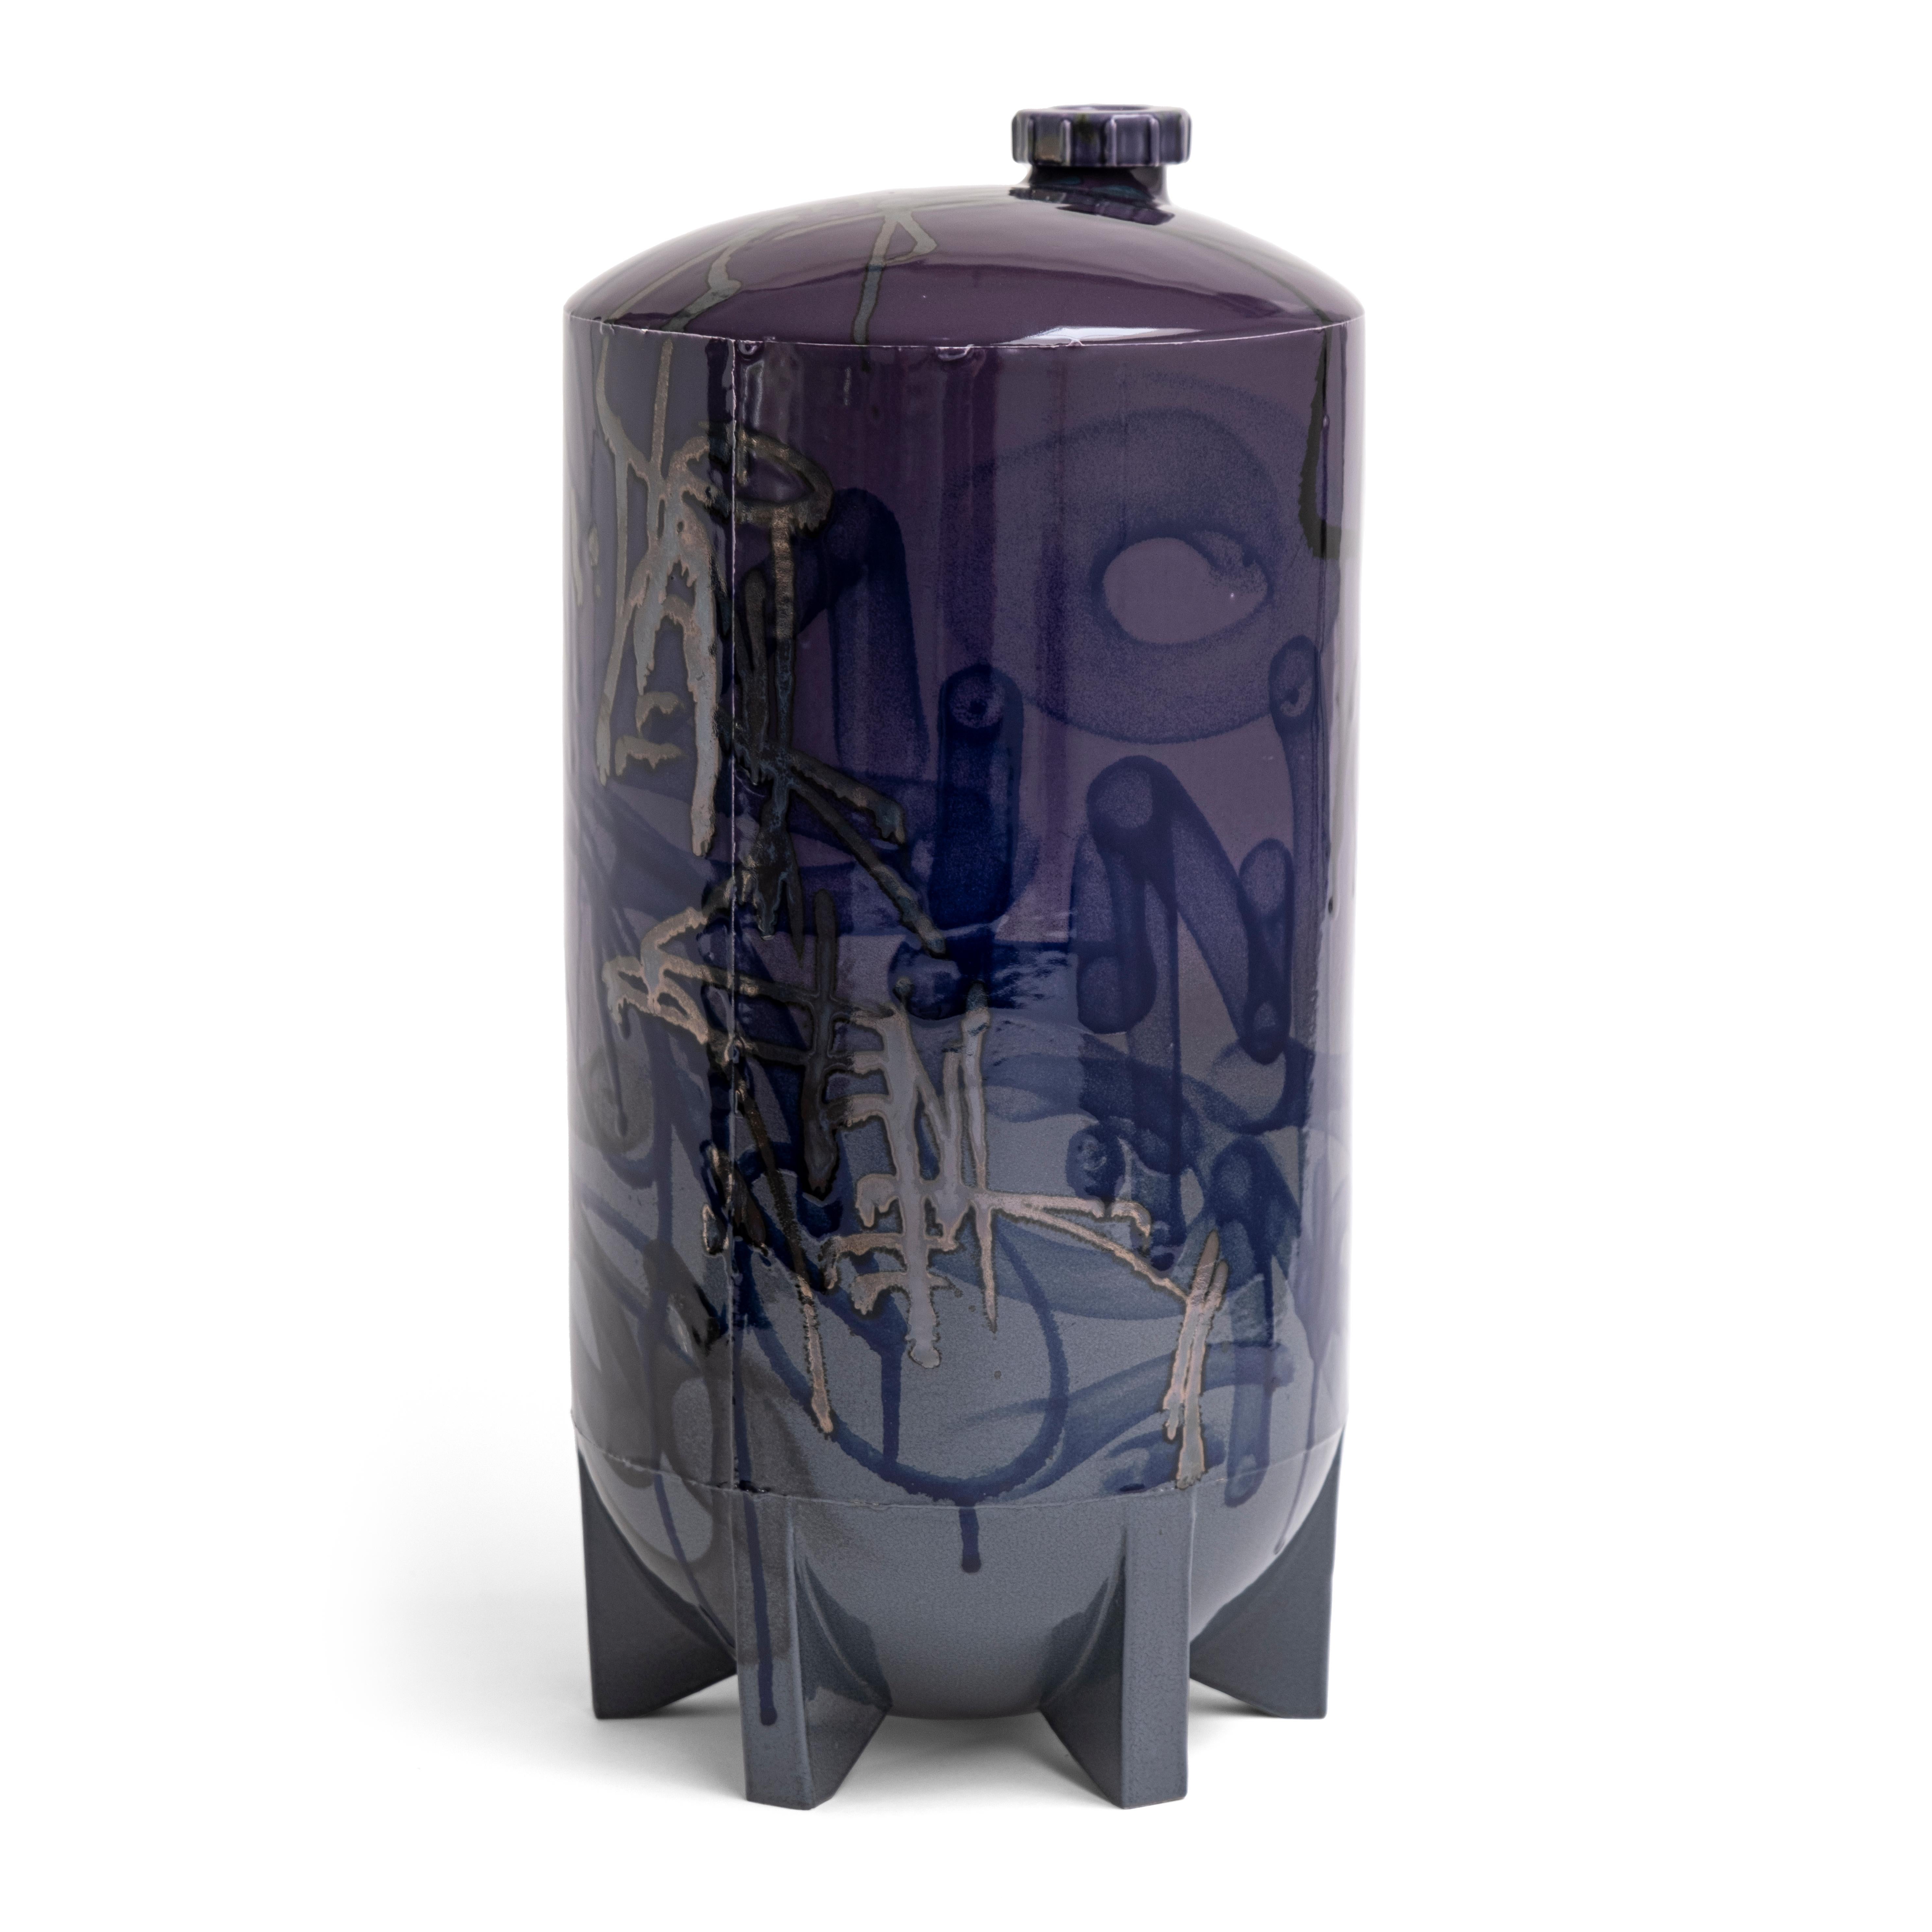 Under pressure 8 by Yuri van Poppel
Dimensions: D 27 x H 55 cm
One of a kind.
Earthenware, layered ceramic glazes, various colors.
Handmade and spray-painted by hand by SunkOne. Removable lid.

Everlasting graffiti spray-painted with ceramic